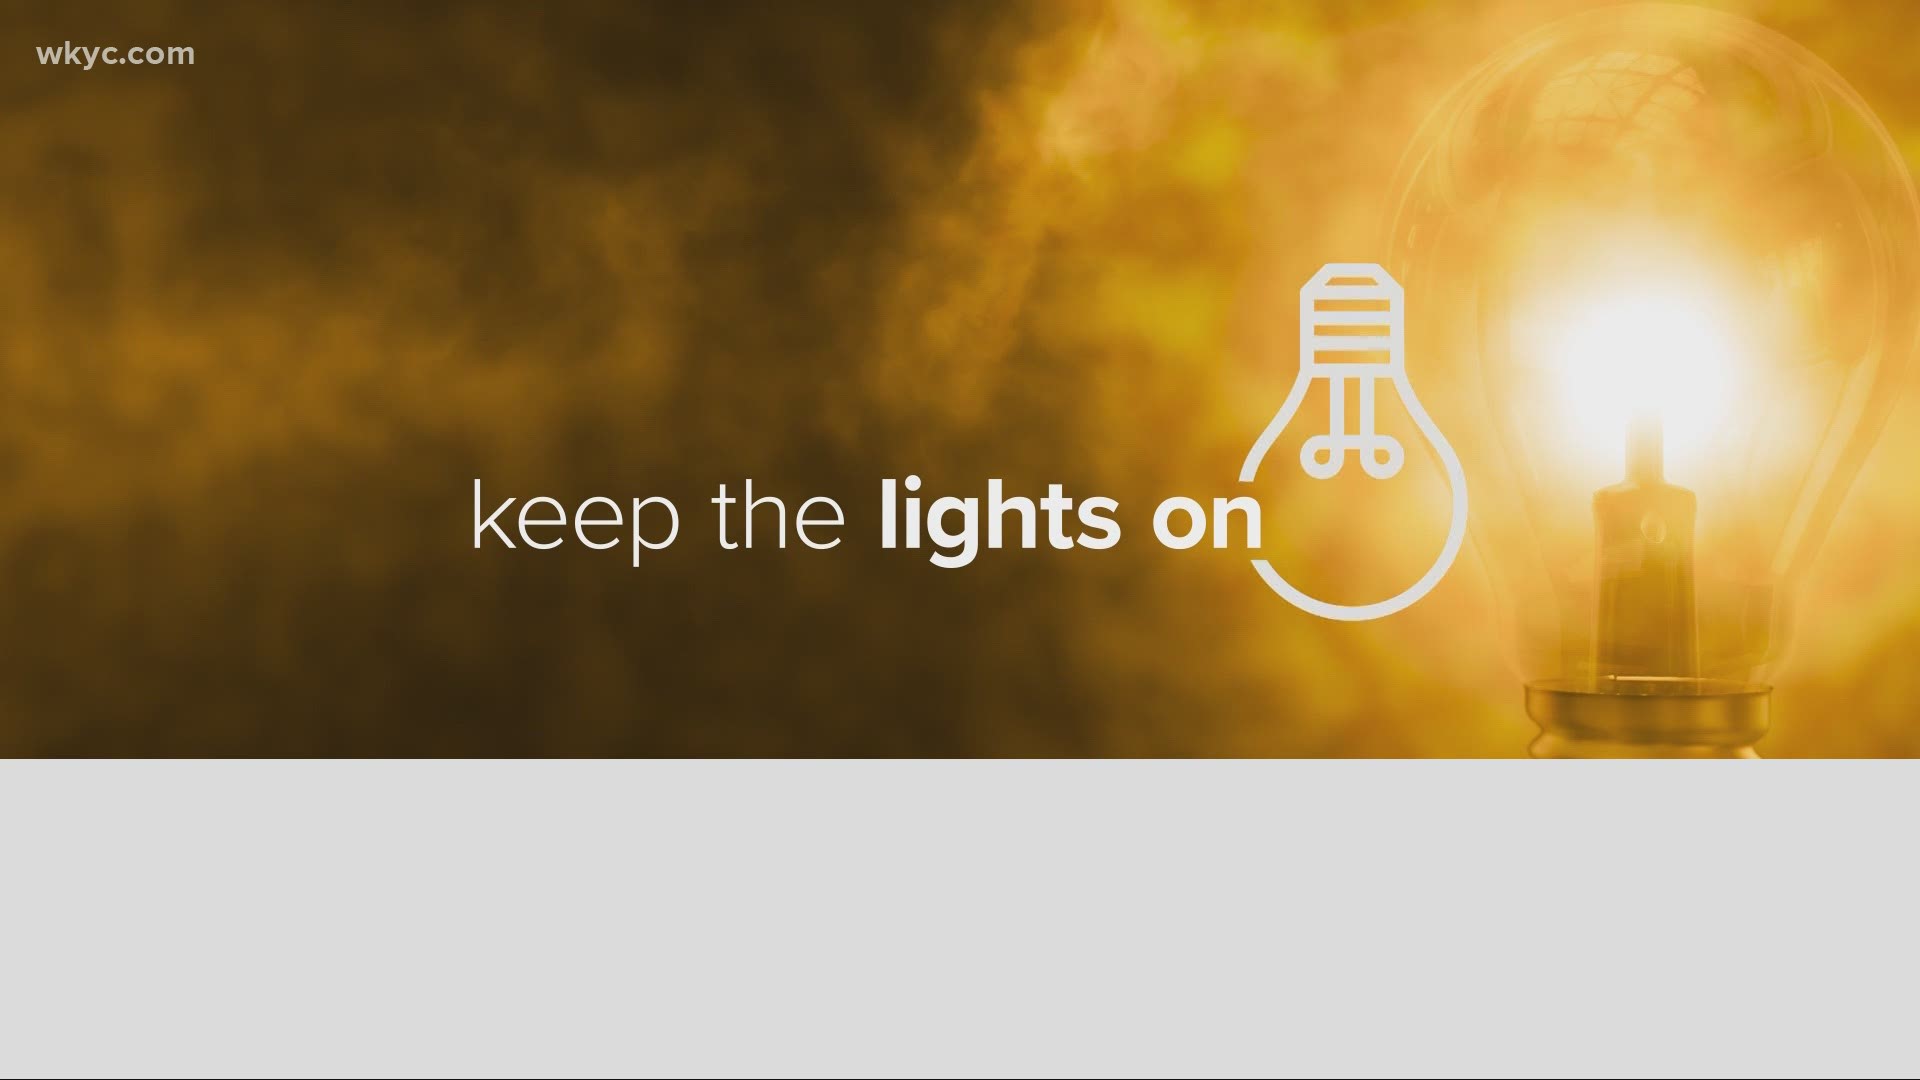 Our "Keep the Lights on CLE" campaign continues tonight.  We are working on raising money to help pay the utility bills of our neighbors in need.